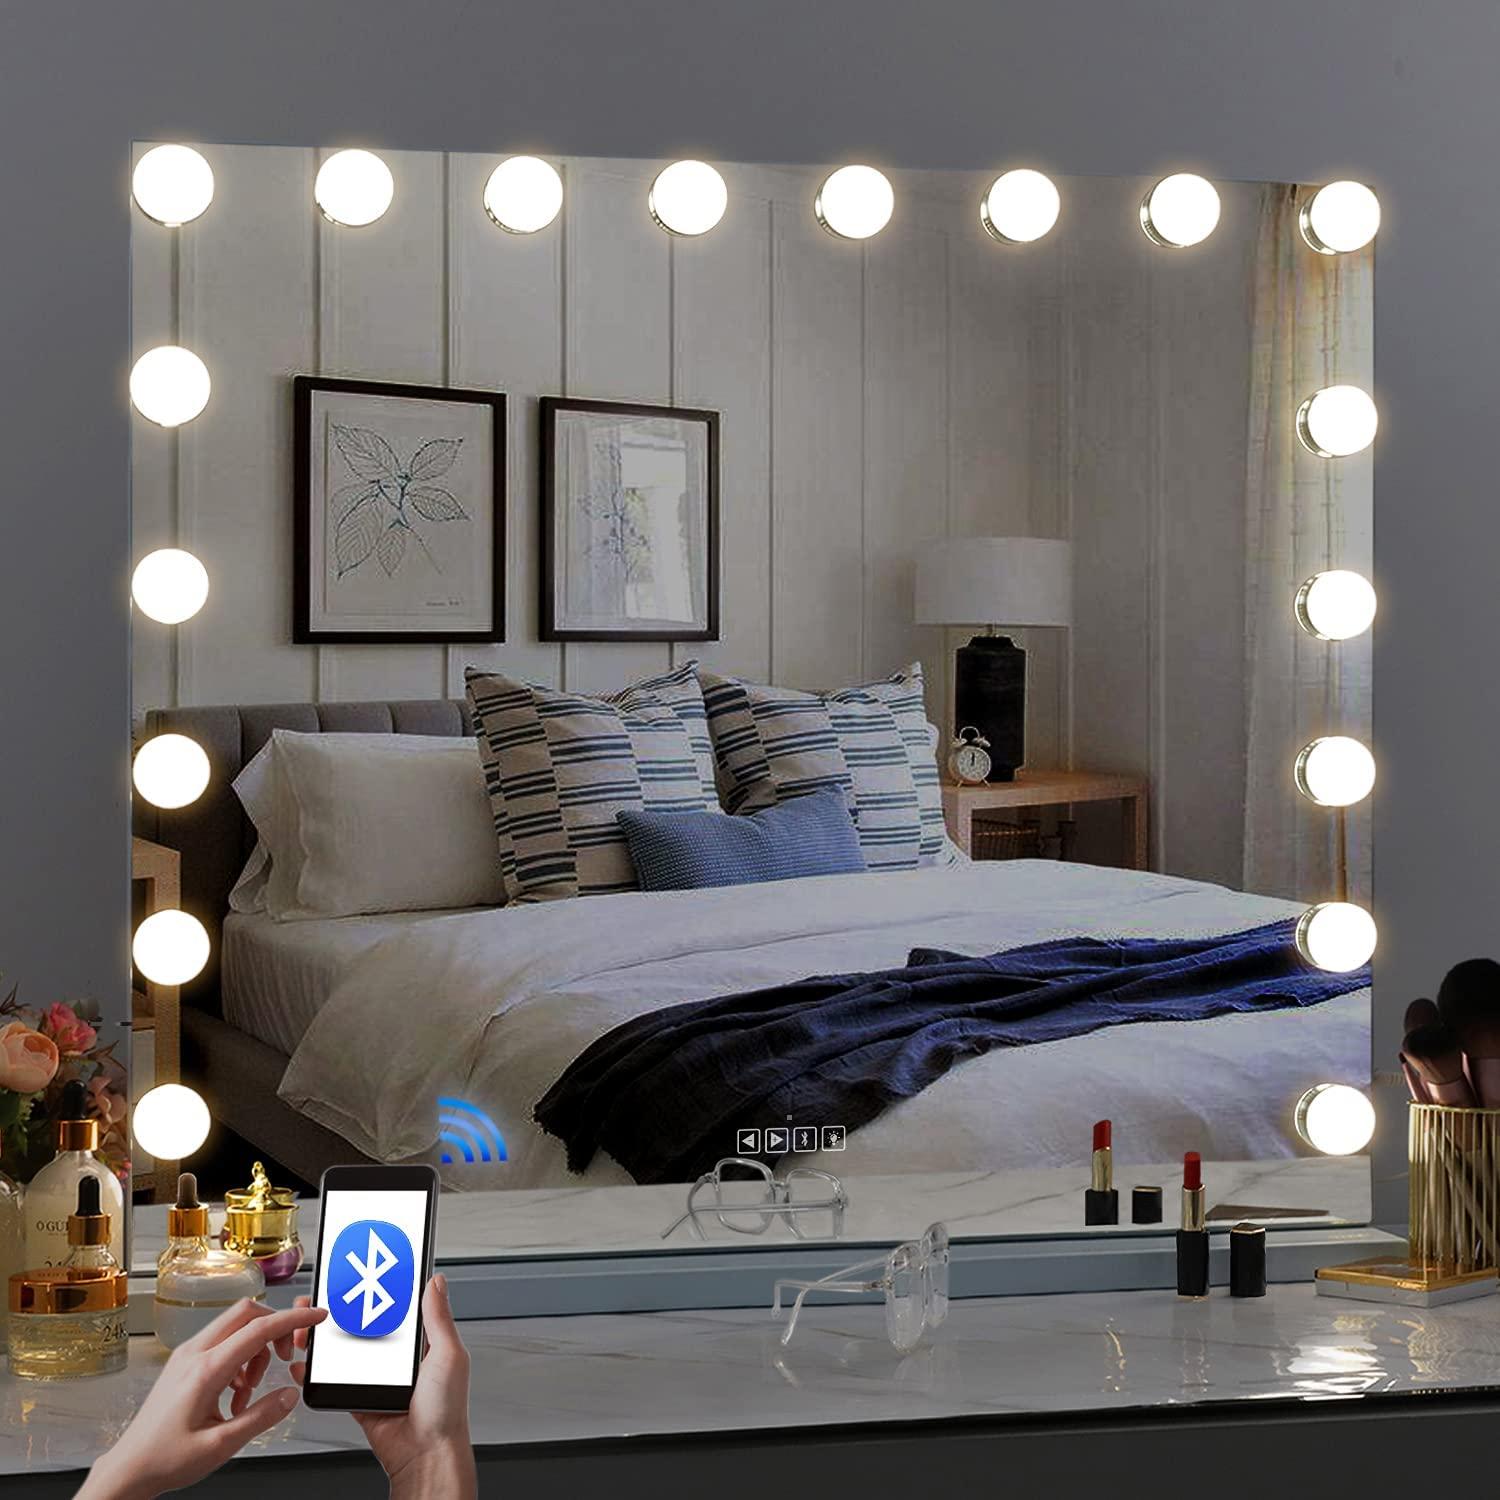  Fenair Vanity Mirror with Lights and Bluetooth Hollywood  Speaker Support Answer Call, Touch Screen, 3 Color Modes Tabletop 15  Dimmable Bulbs